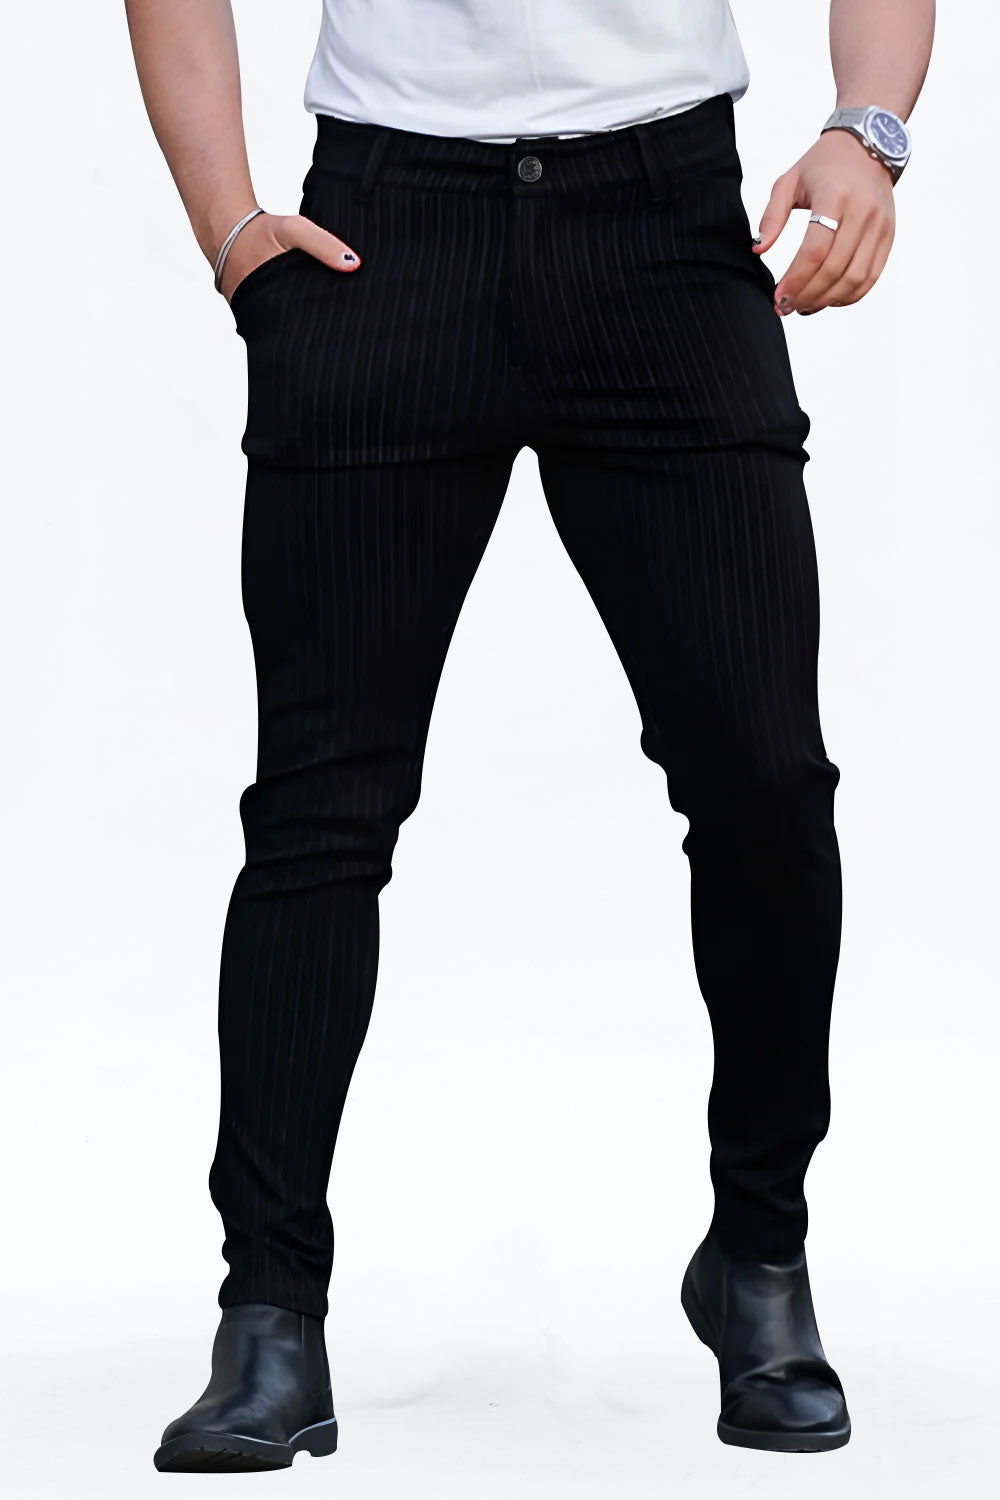 Gingtto Black Vertical Stripes Stretchy Fashion Casual Chinos For Men